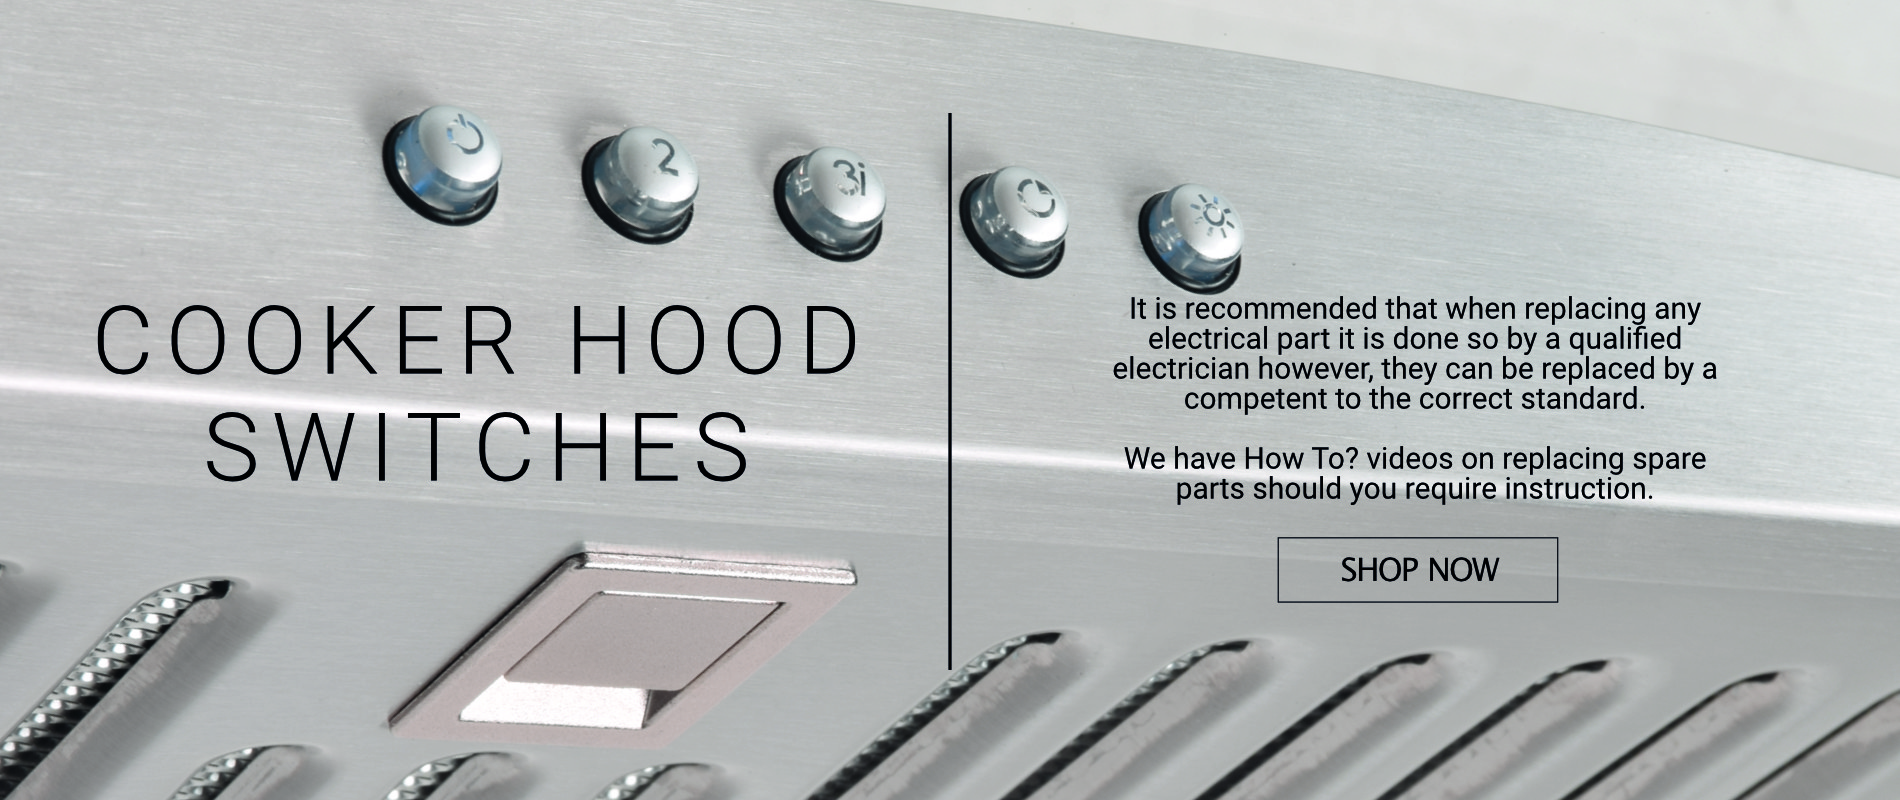 Cooker Hood Switches